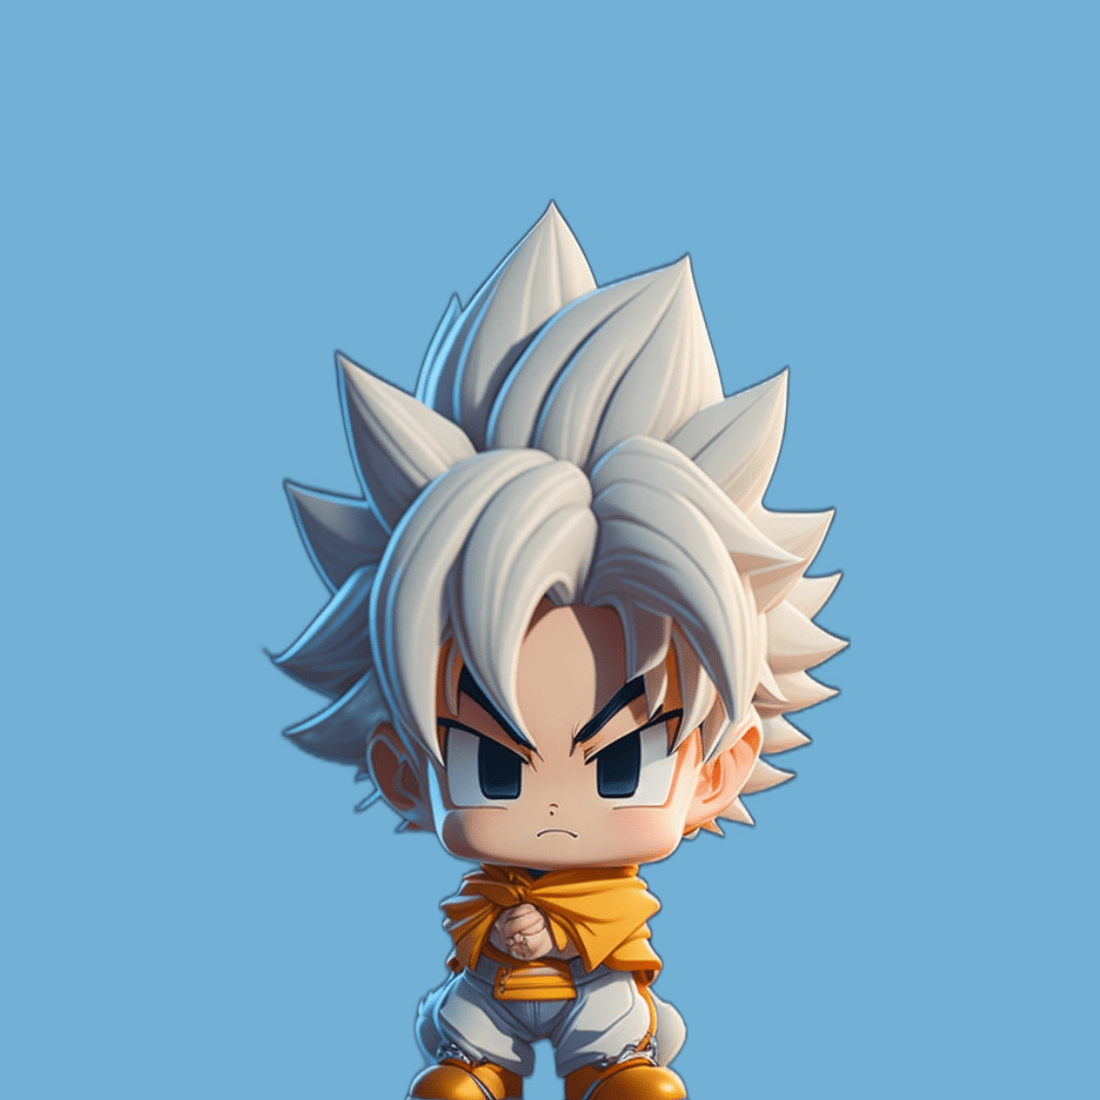 3D Animated style Goku design high quality preview image.